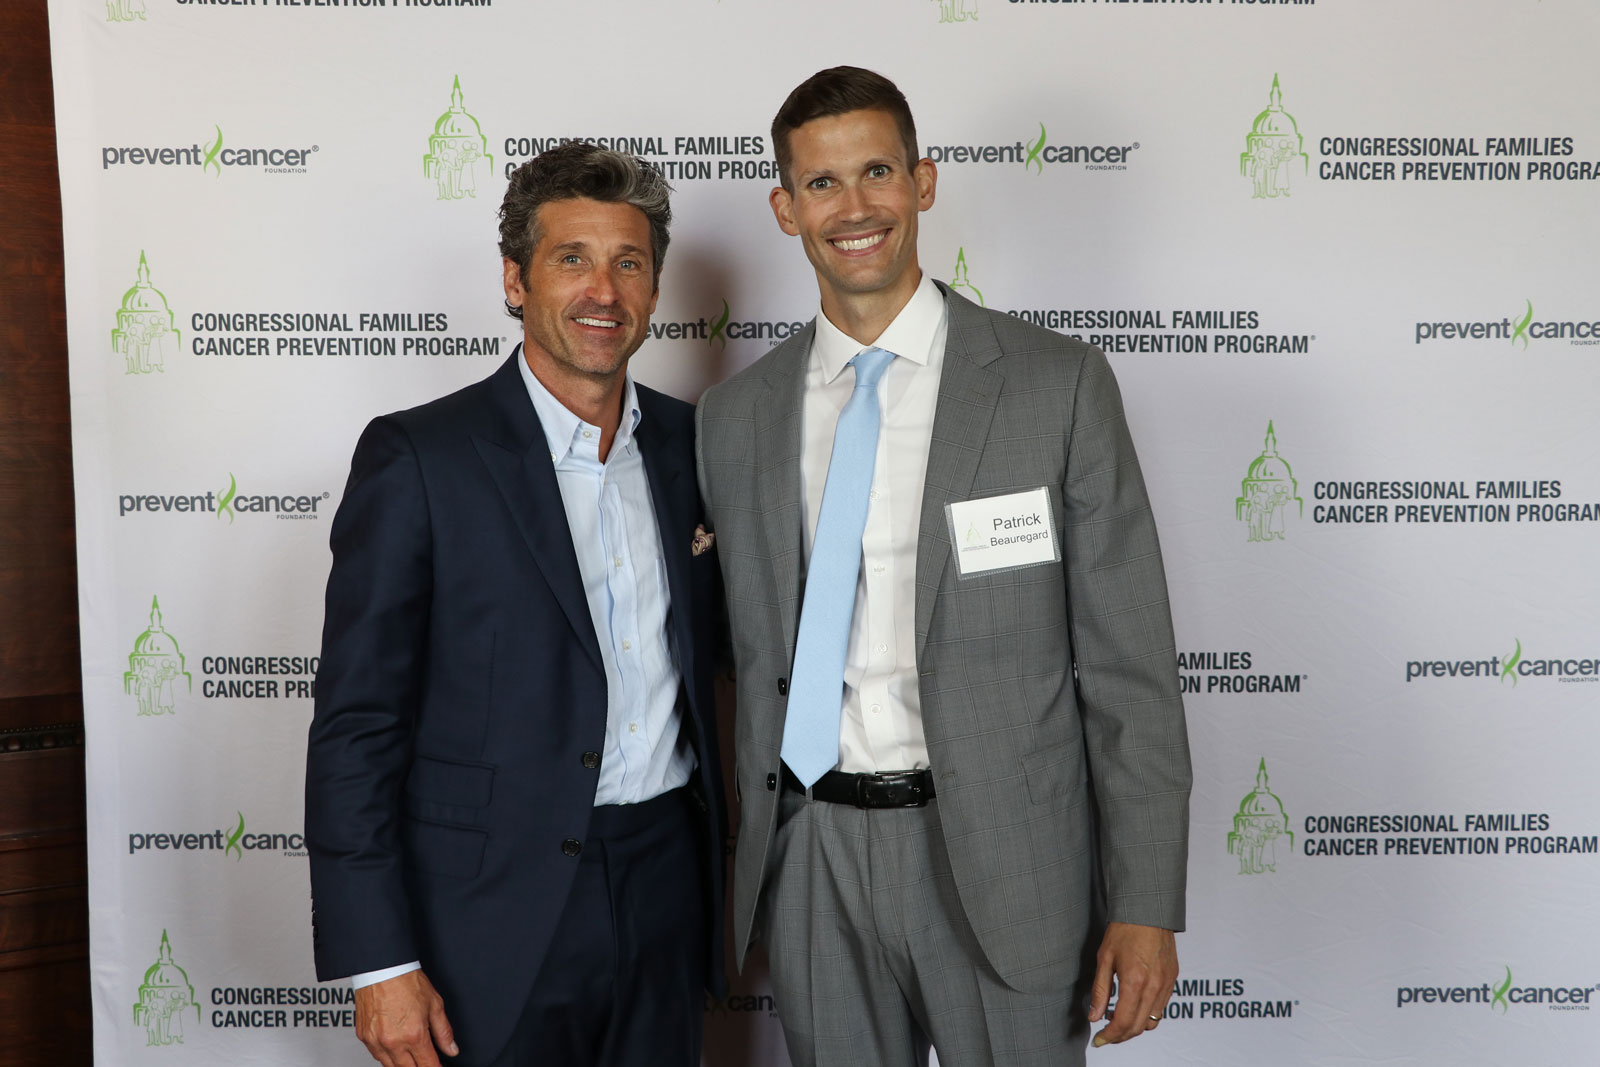 Actor, producer and advocate Patrick Dempsey with Patrick Beauregard